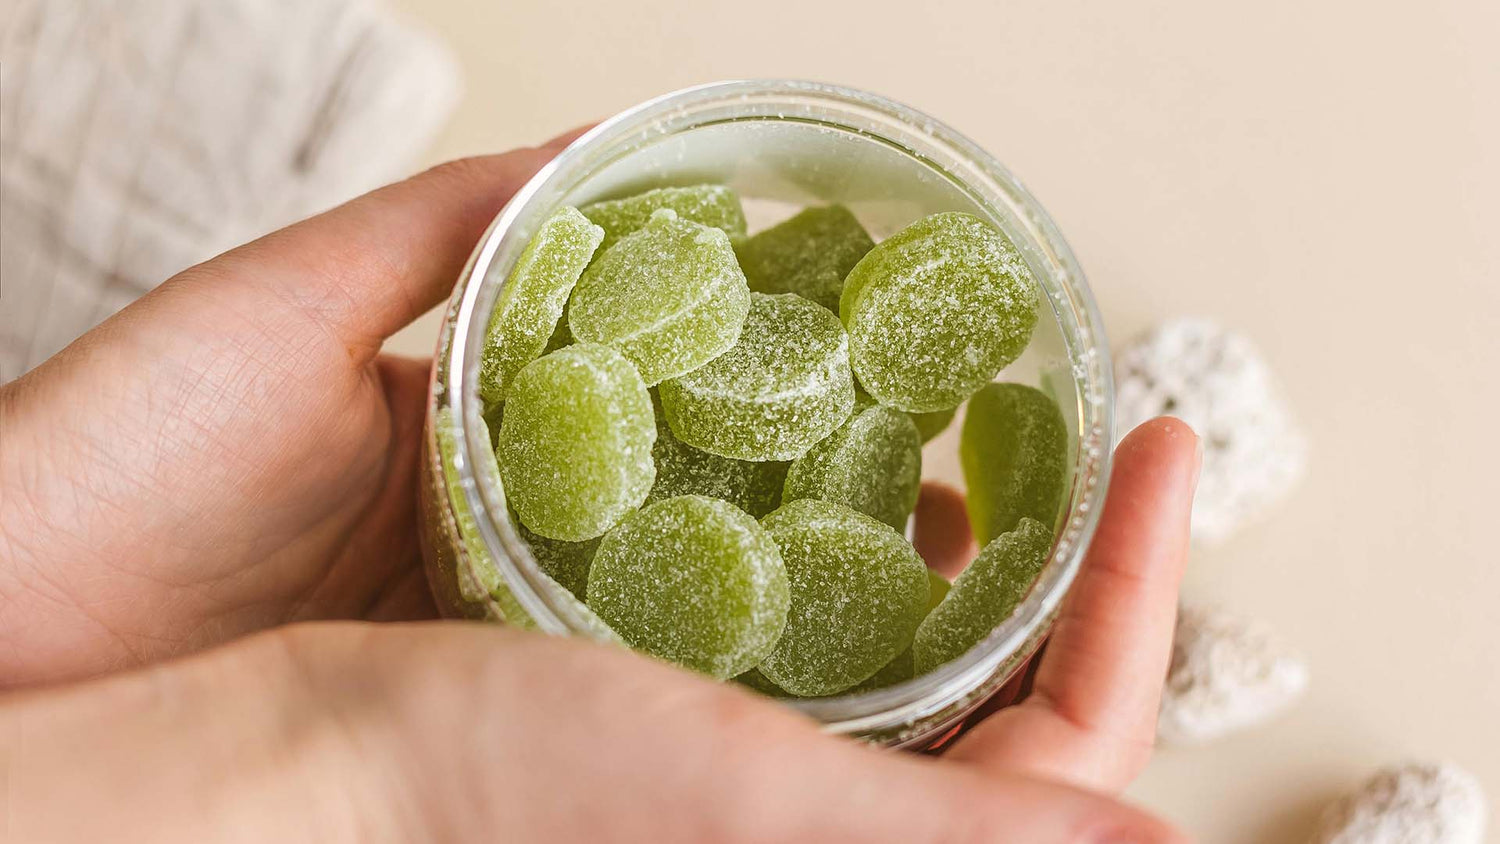 hands of a person holding a jar filled with green-colored gummies